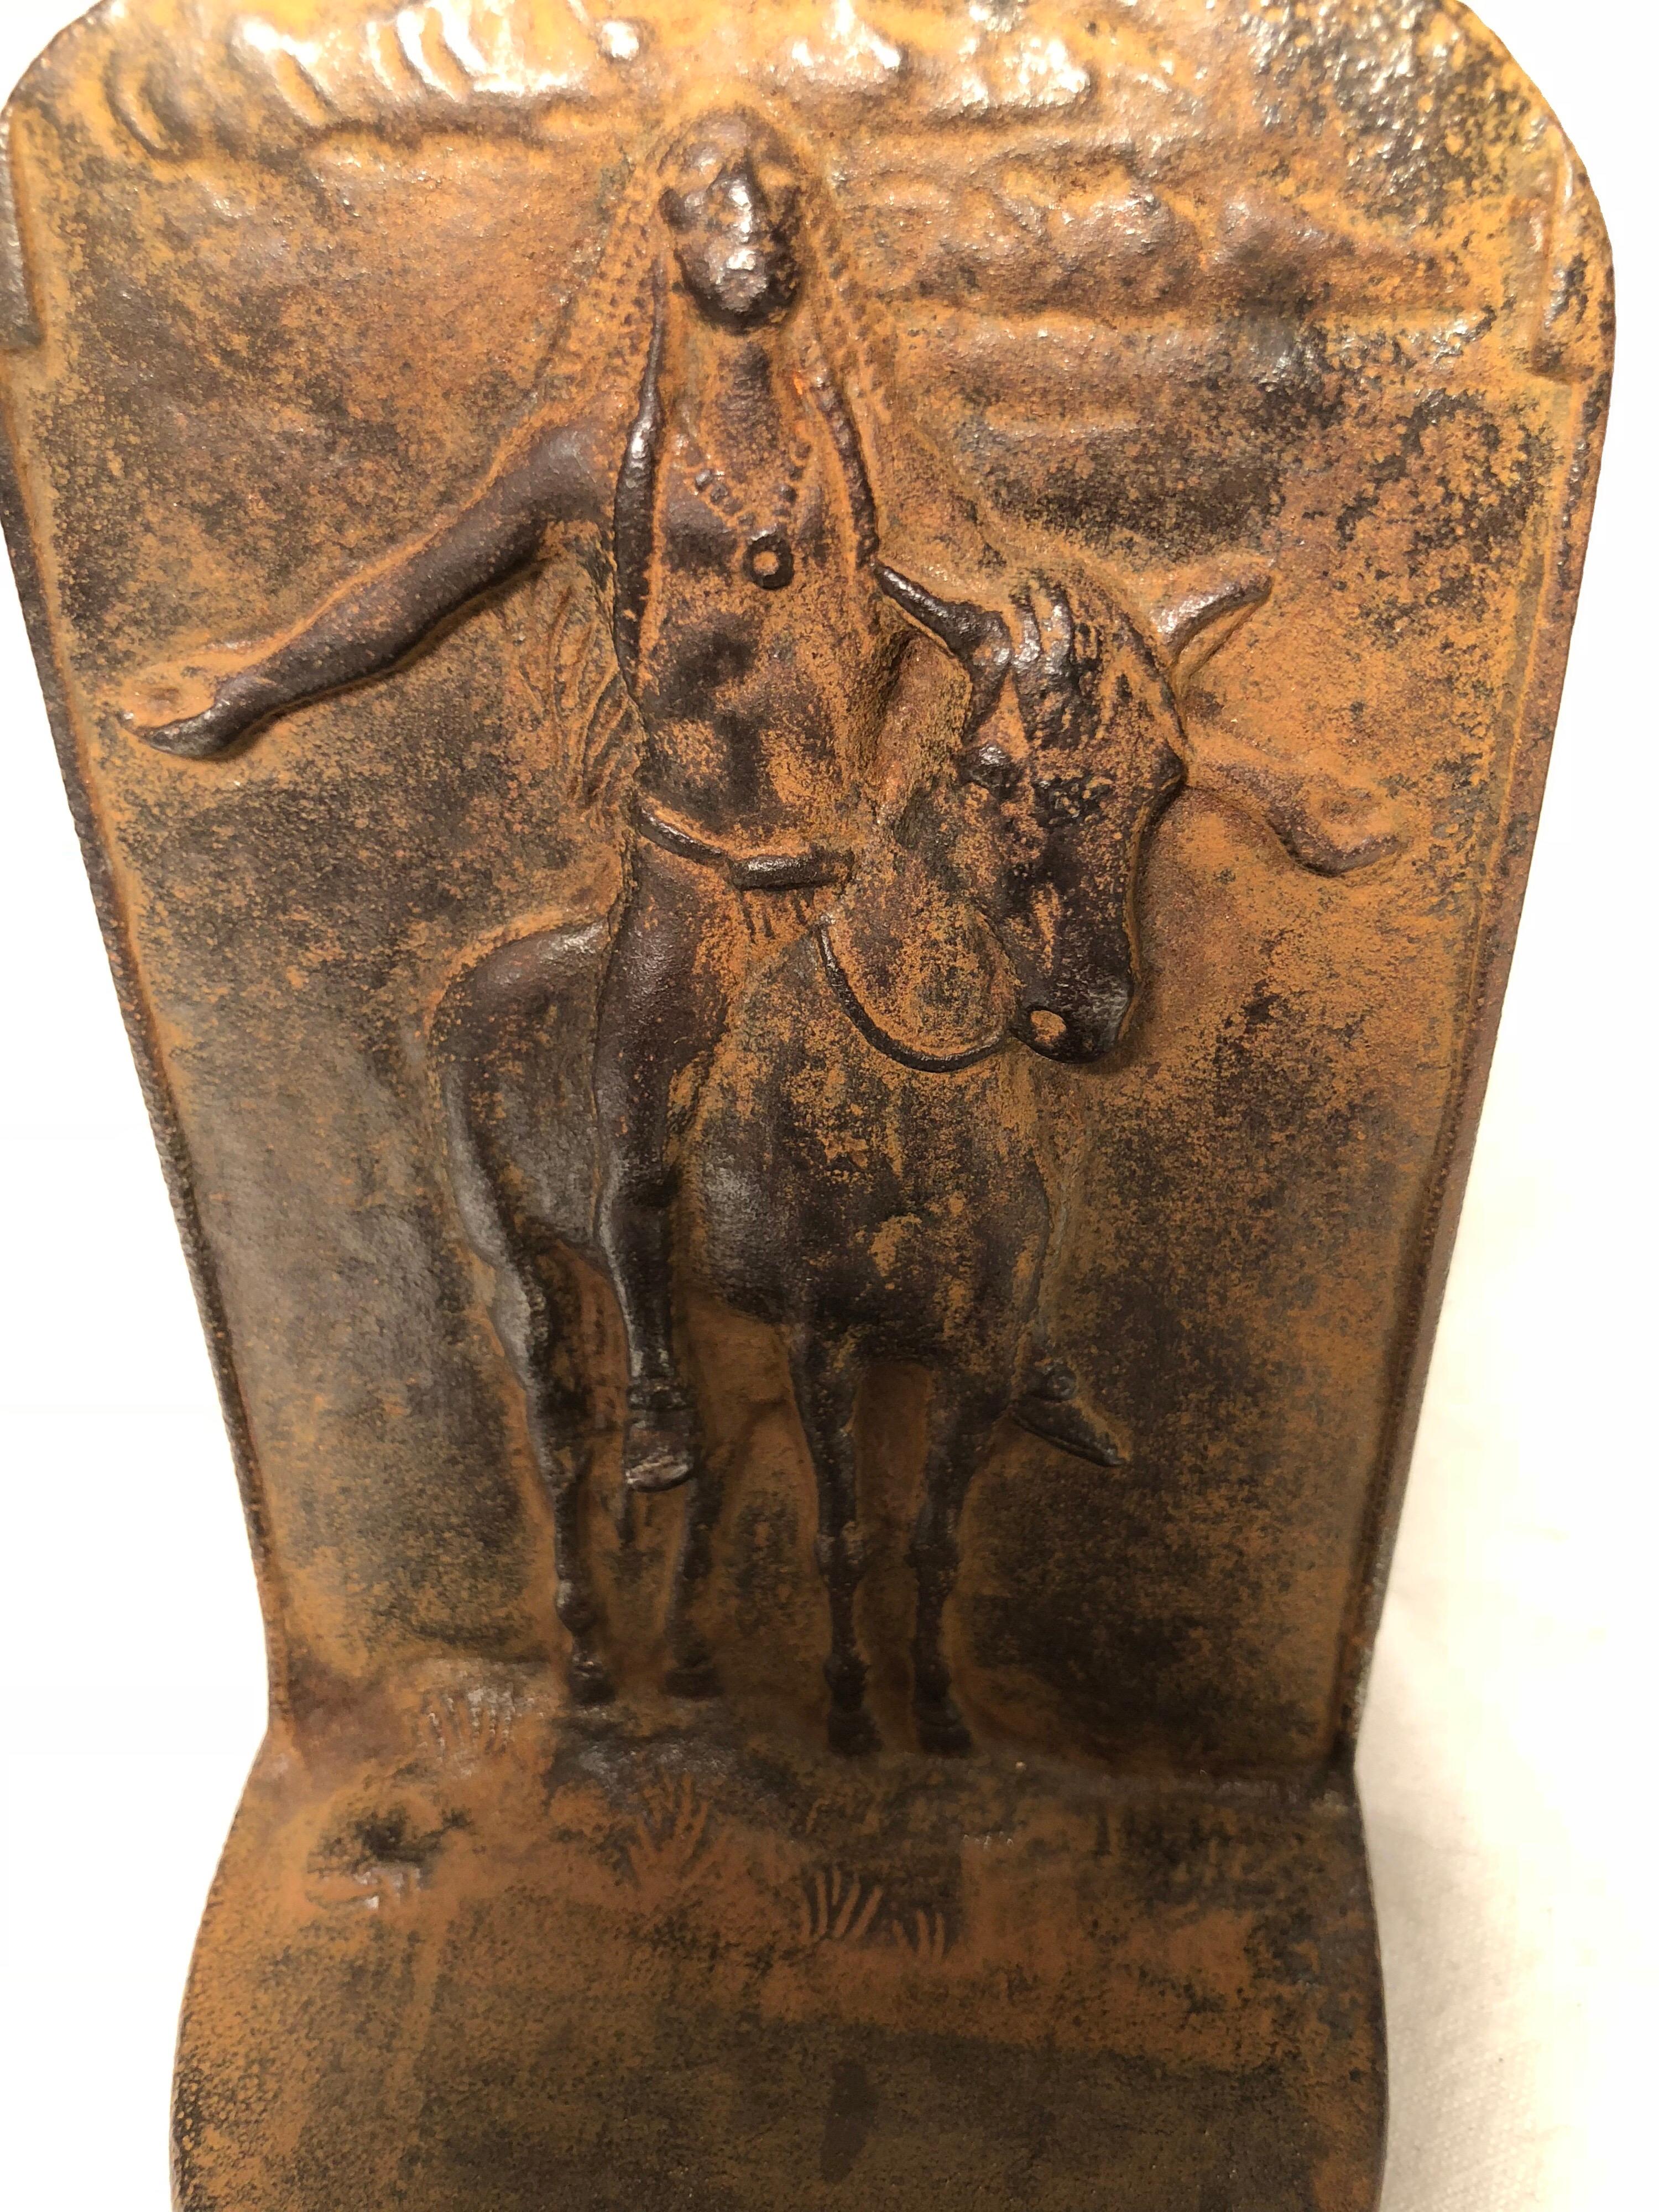 Indian doorstop or bookend. Nice patinated iron of an American Indian on a horse. Signed Bronze net, circa 1925.
This is based on the 